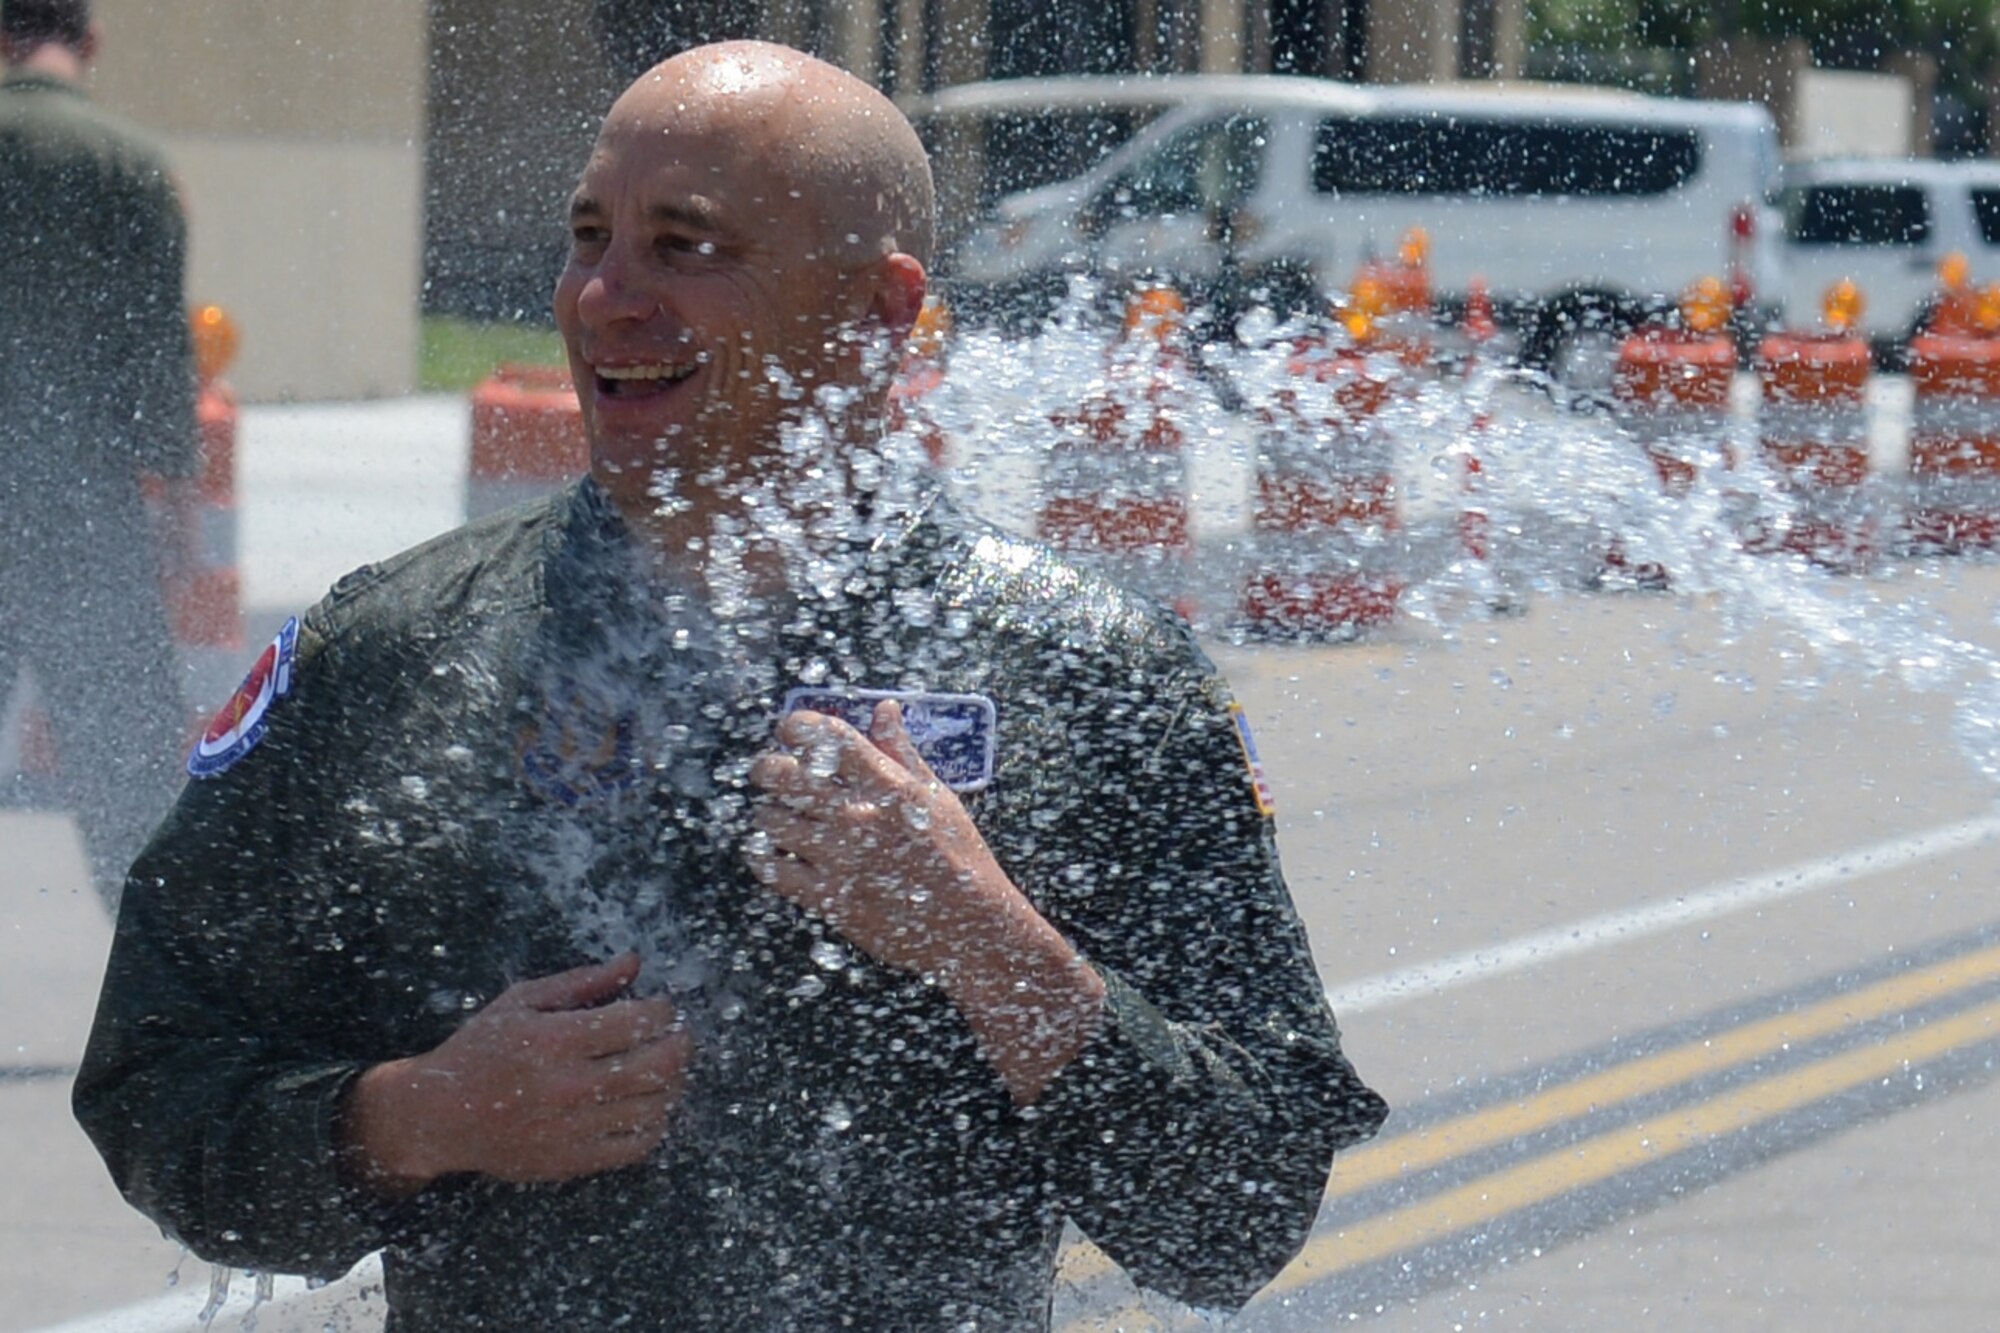 Col. David Condit, 403rd Operation Group commander, gets doused with a fire hose in honor of his final flight with the 403rd Wing May 5, 2016, Keesler Air Force Base, Mississippi. Condit has been assigned to the 403rd Wing since July 2013 and has more than 4,000 flight hours throughout his career in the Air Force. His last day with the 403rd Wing is May 15, 2016. His next assignment is as the 908th Airlift Wing commander at Maxwell Air Force Base, Alabama. (Air Force photo/Airman 1st Class Travis Beihl)
